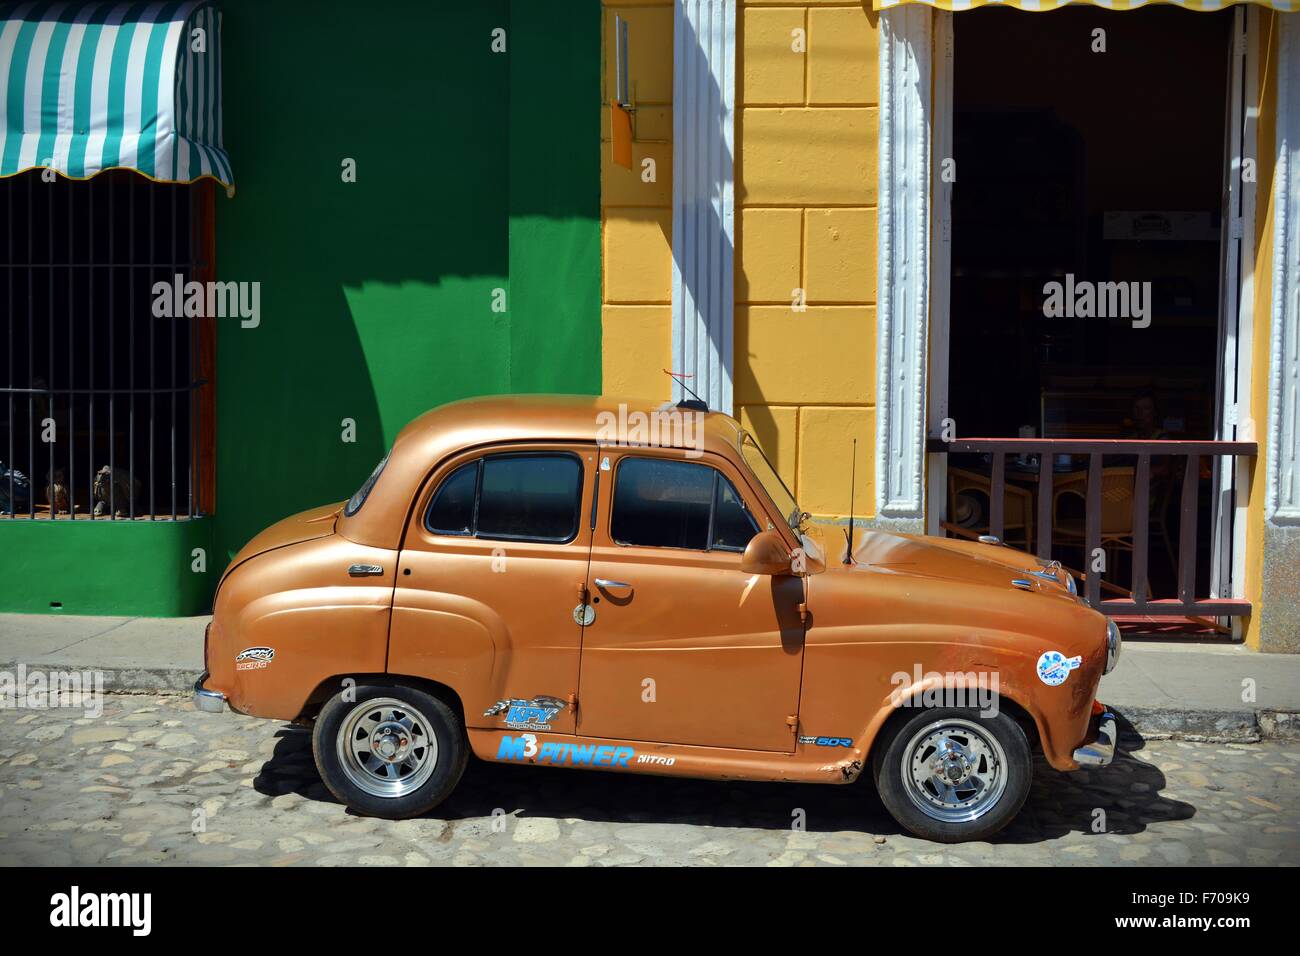 small bronze car parked on a sunny day on a cobbled street next to colourful shops and cafe in Trinidad Cuba Stock Photo